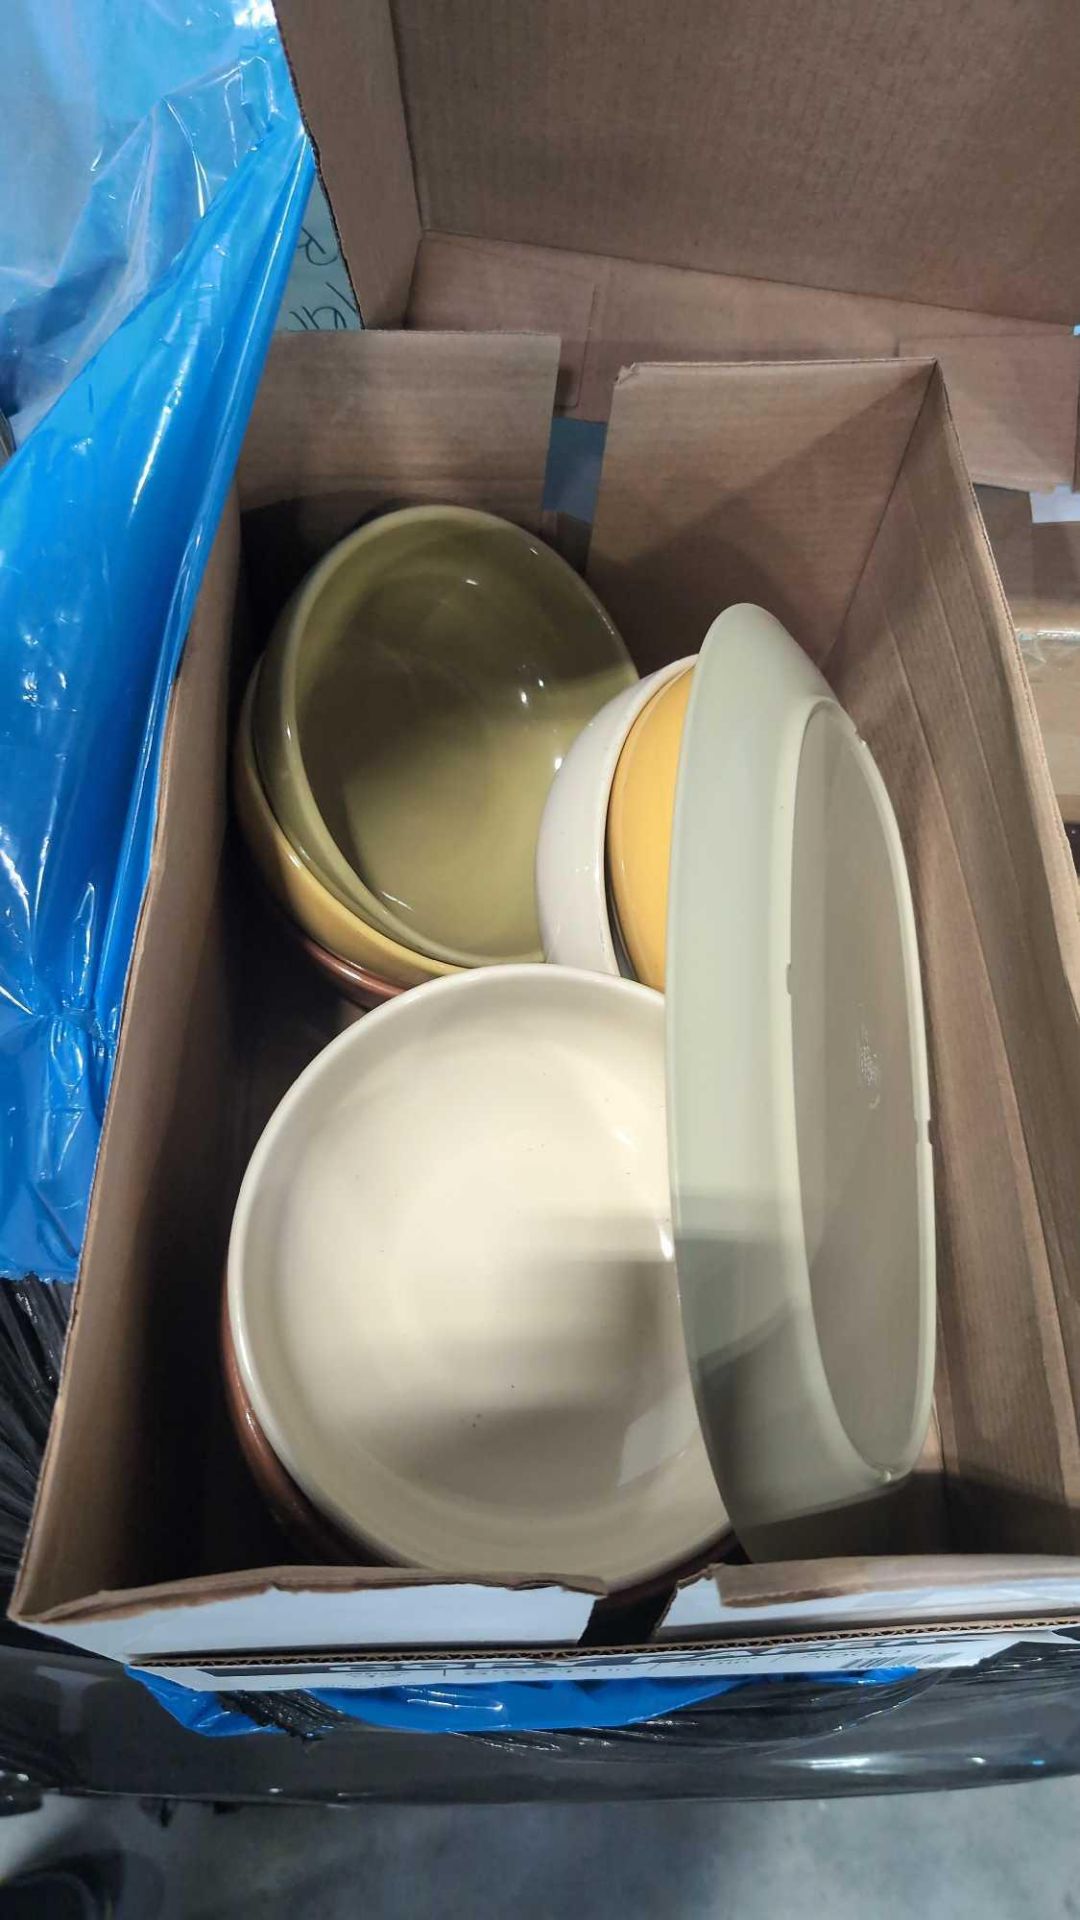 Dishes: plates and bowls - Image 2 of 5